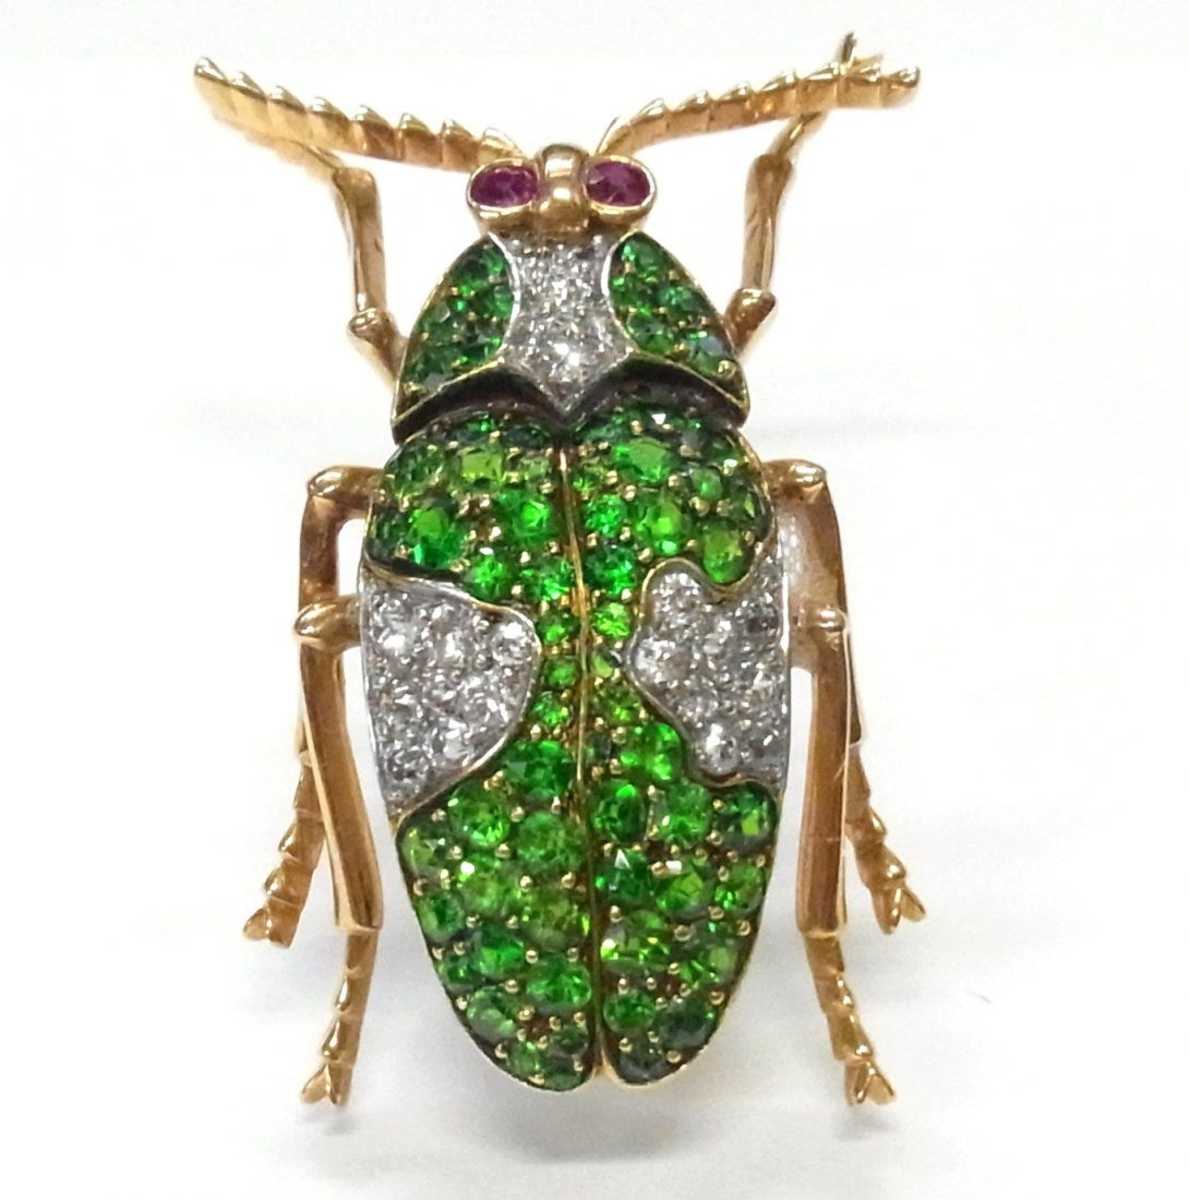 An 18k rose gold beetle brooch, encrusted with ultra-fine green demantiod garnets and old cut diamonds, and two ruby eyes, 1-3/8" x 7/8"; estimate: $3,000-$5,000.